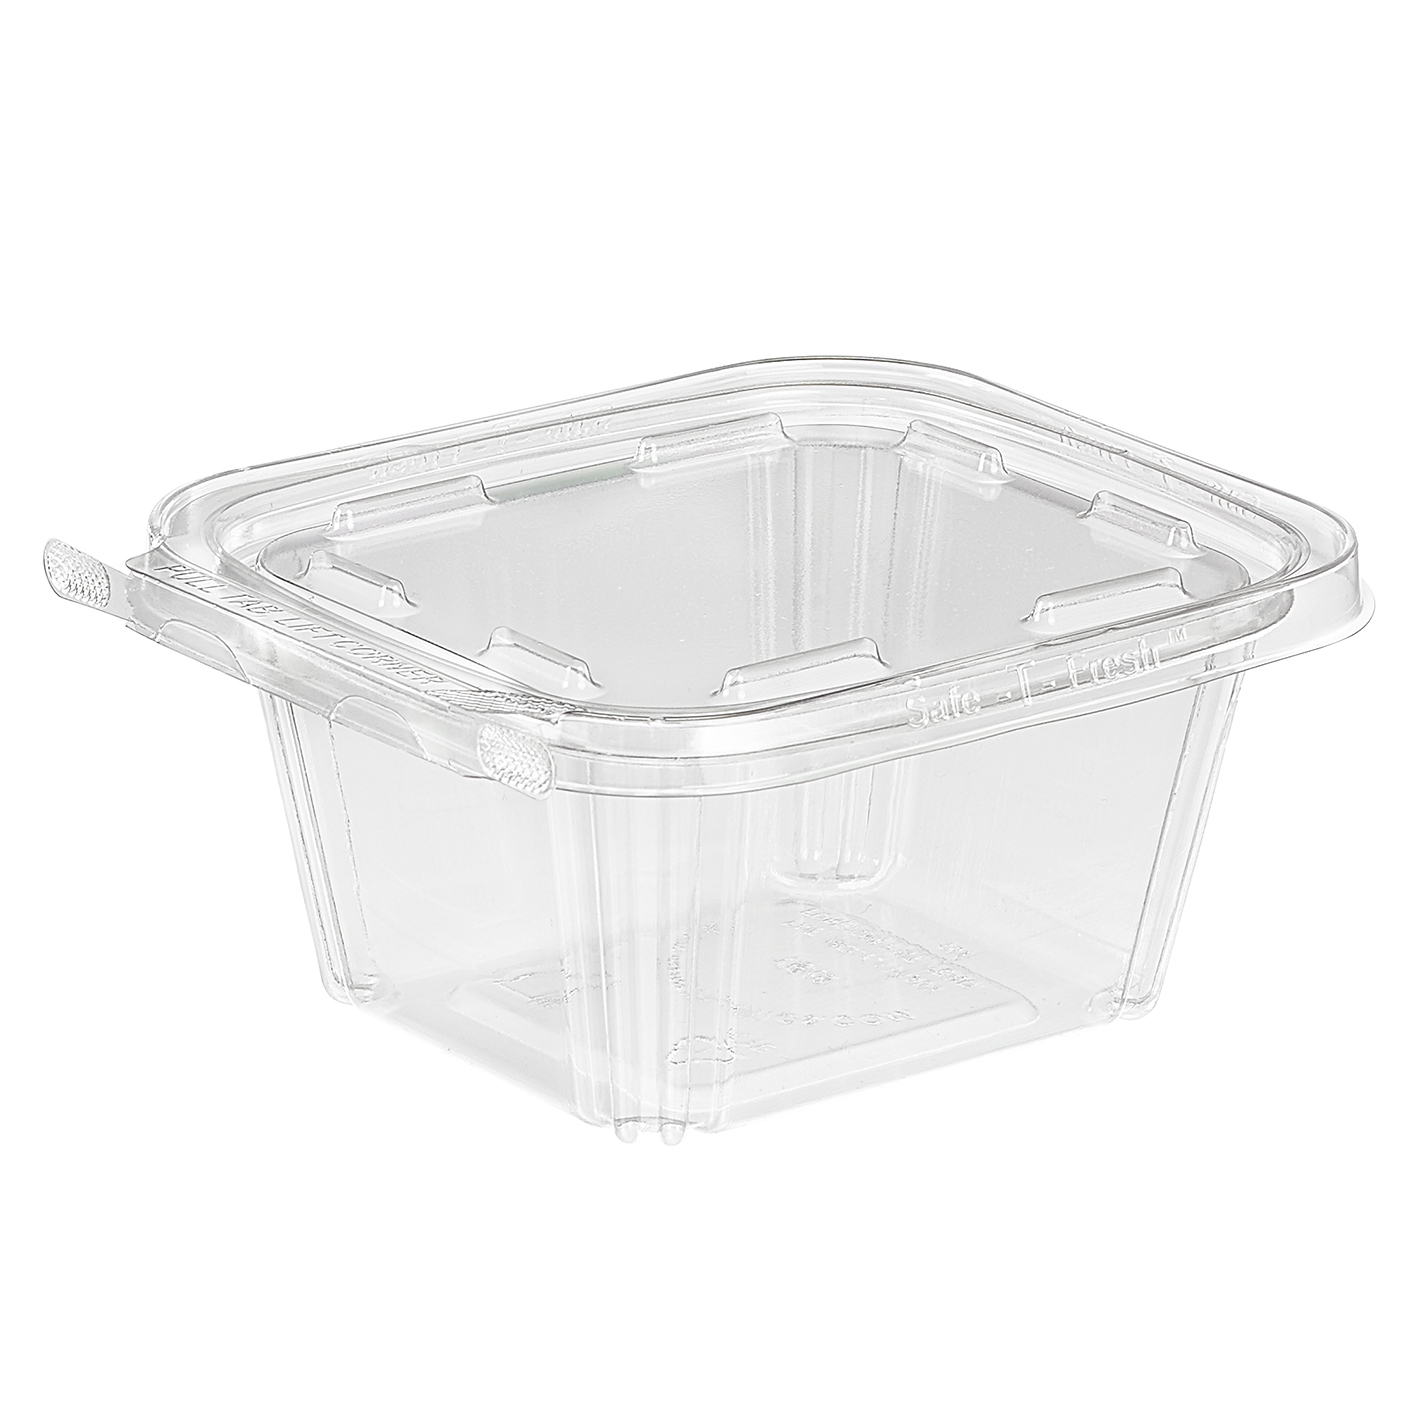 TS16 16OZ. TAMPER EVIDENT
CONTAINER INLINE 240/CASE